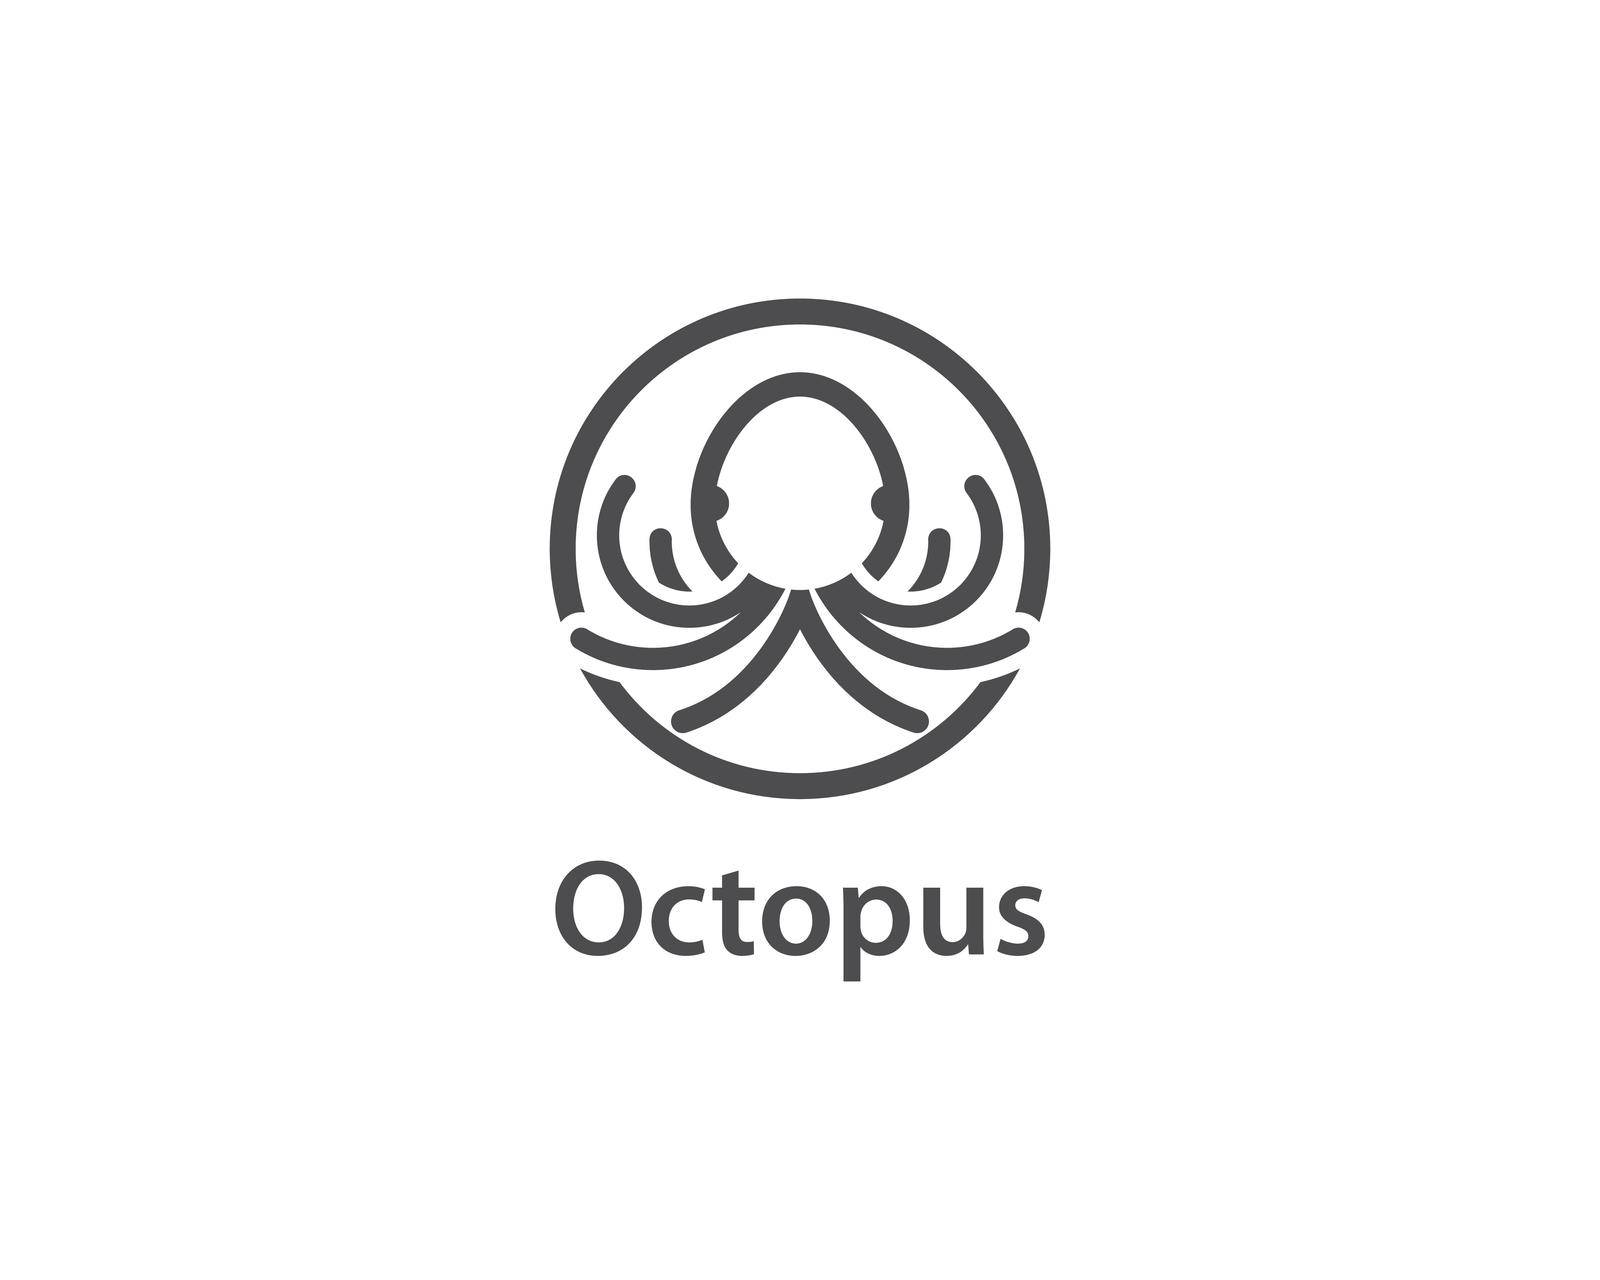 Octopus logo ilustration vector by awk